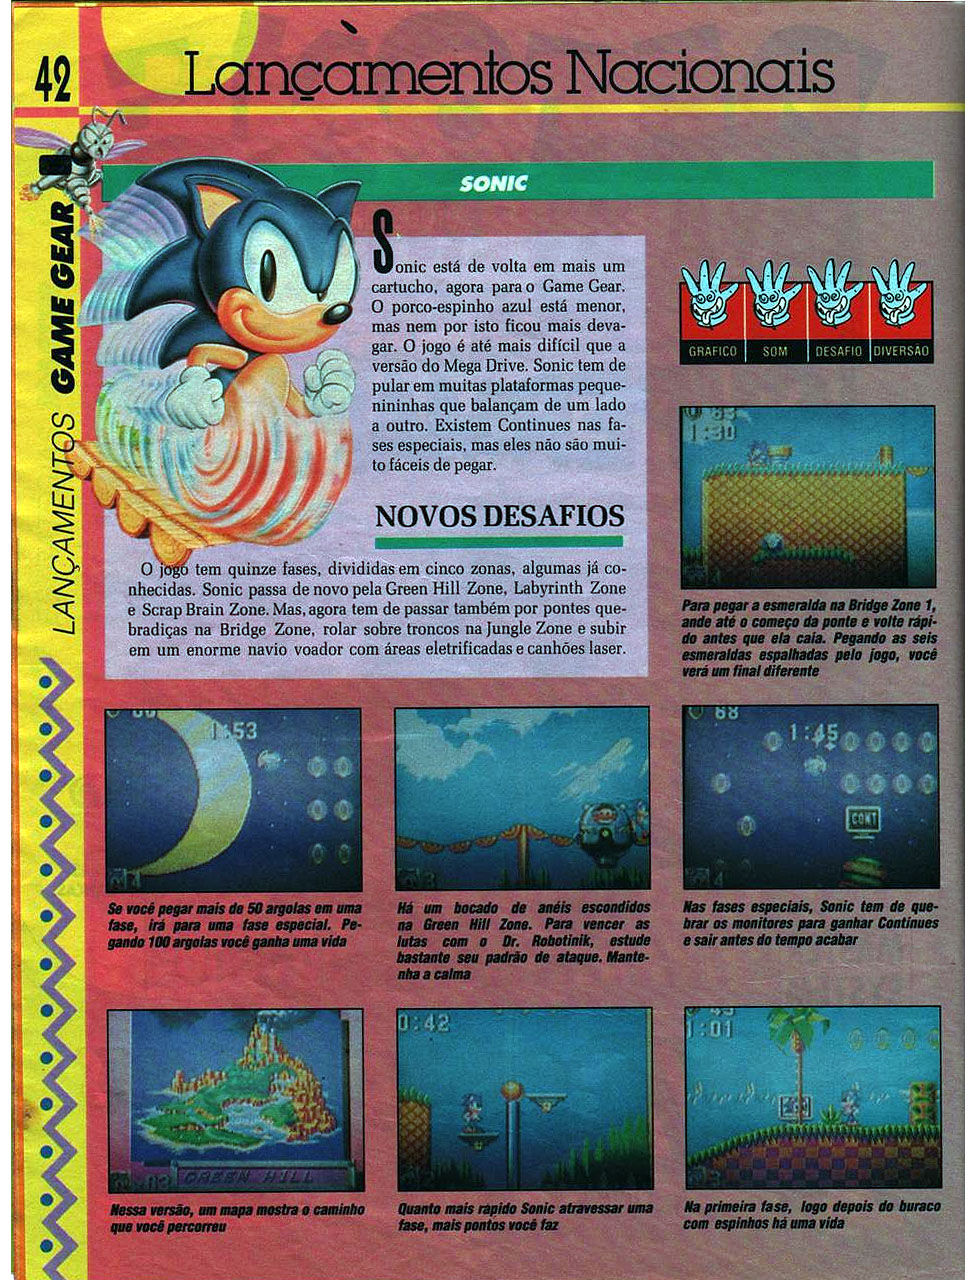 Sonic category. Sonic Scanner.